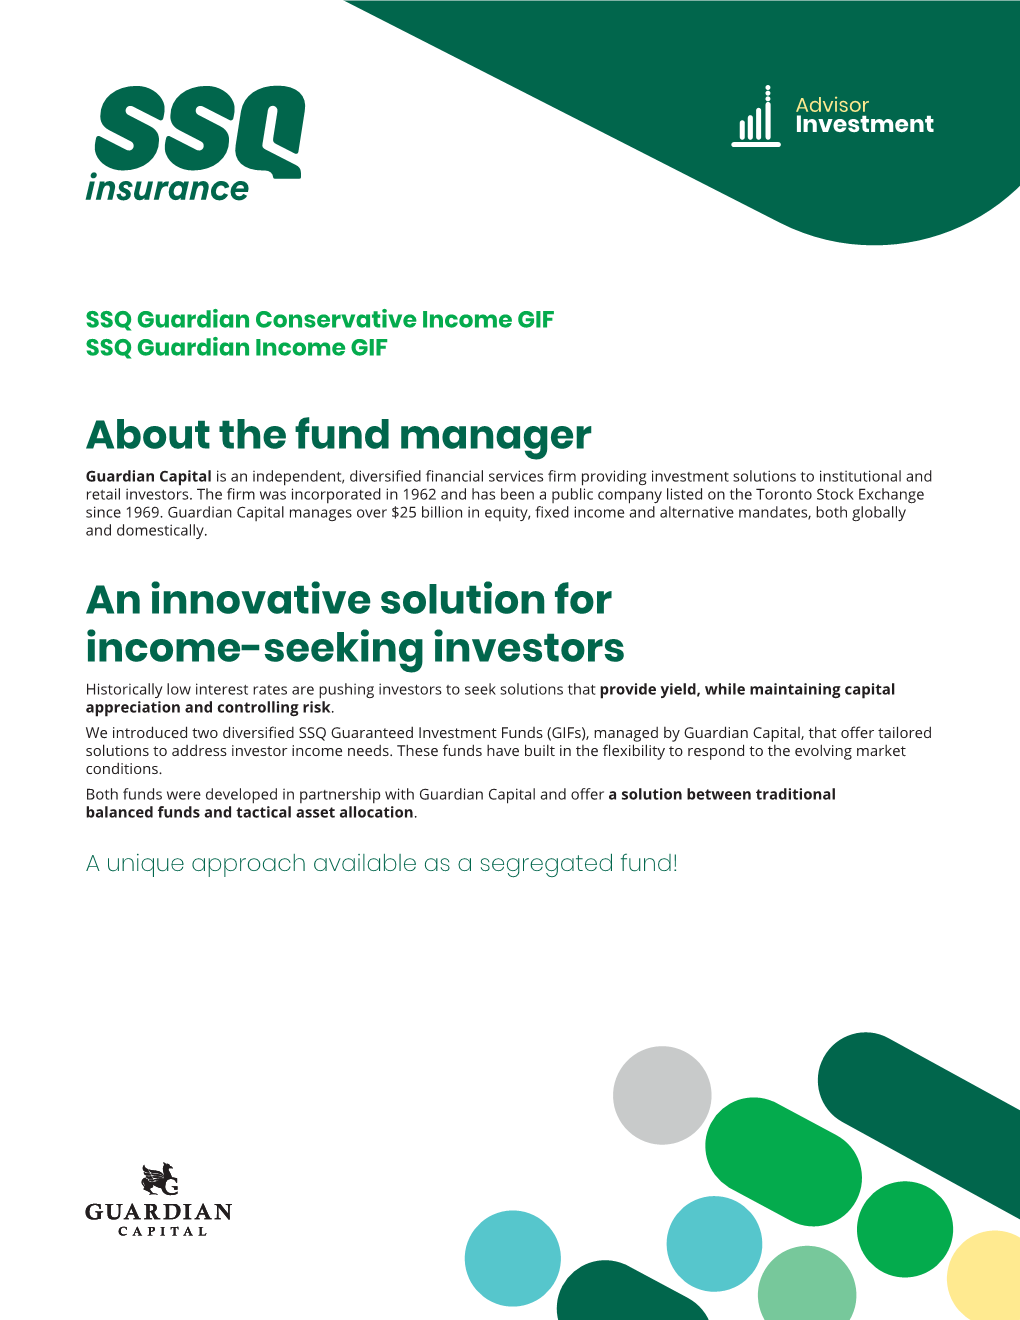 About the Fund Manager an Innovative Solution for Income-Seeking Investors